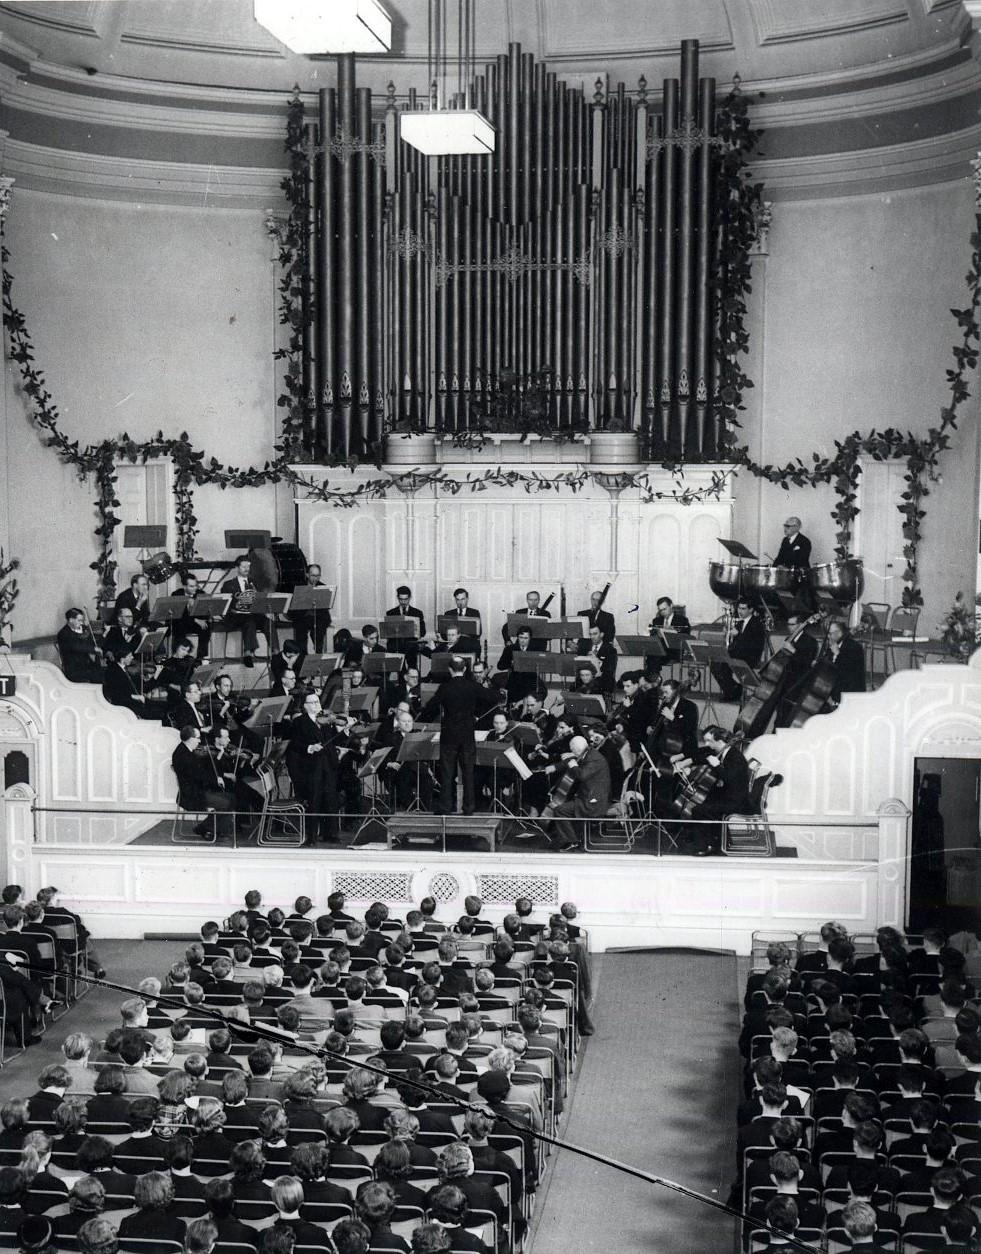 Vanished Worcester. An audience of schoolchildren at an orchestral concert in the Public Hall, Worcester